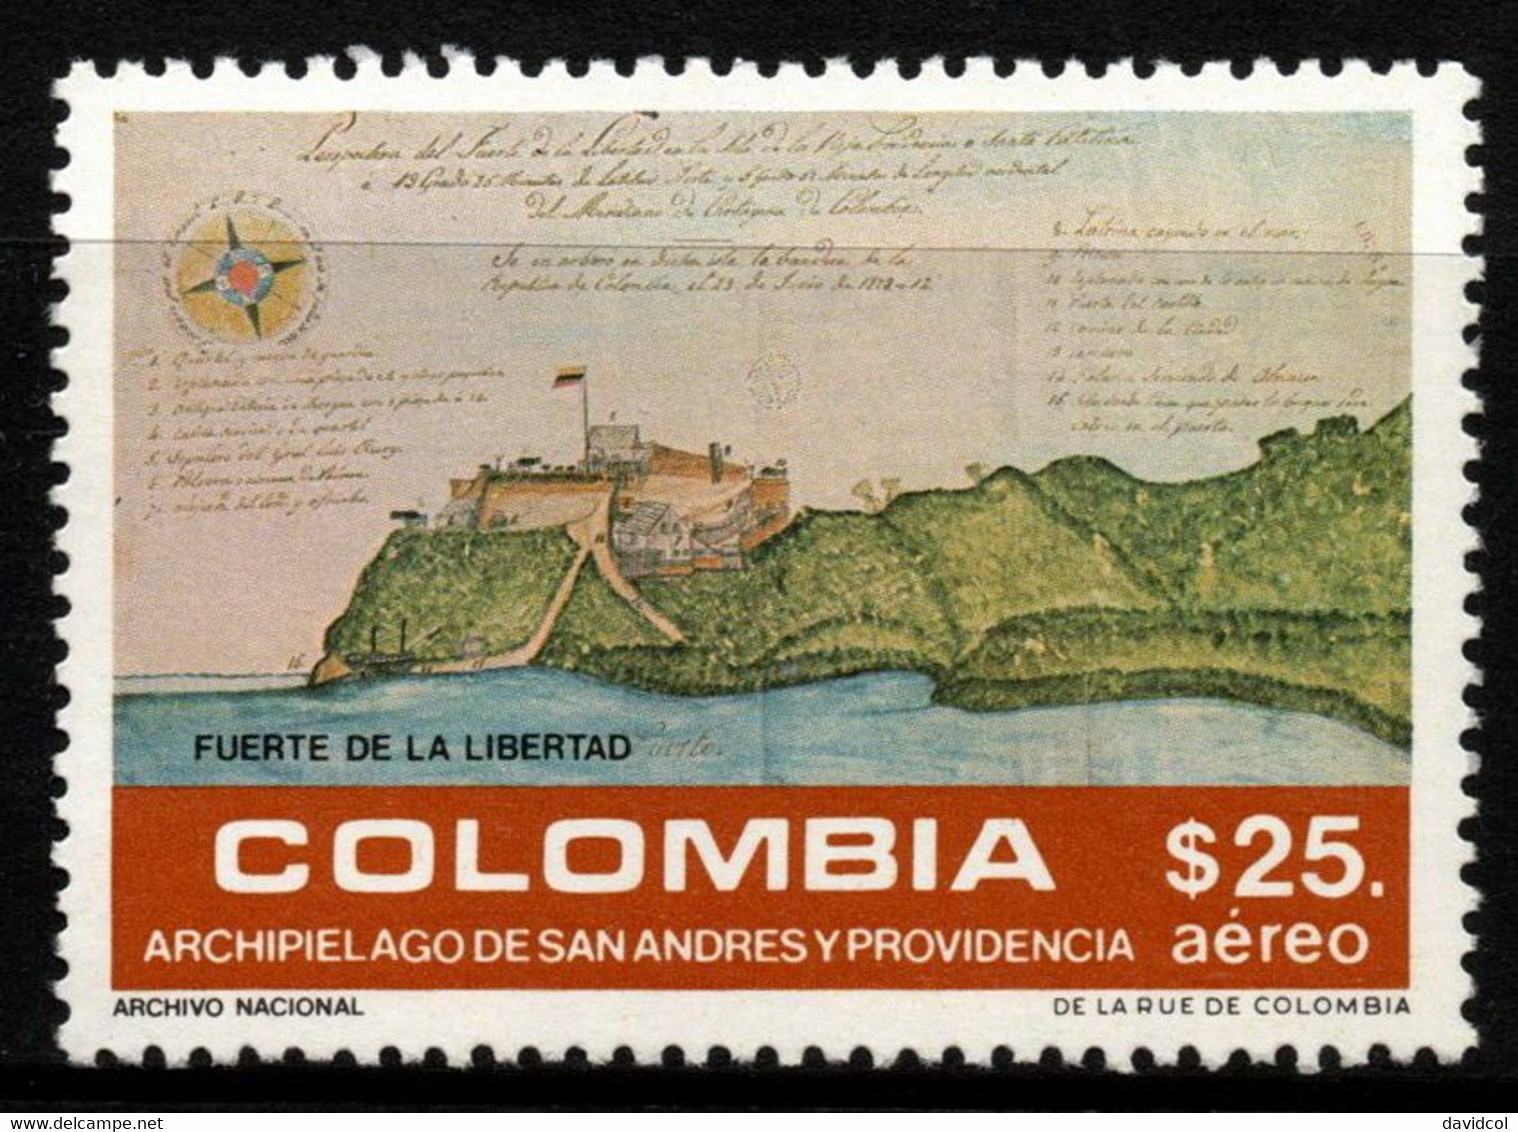 01- KOLUMBIEN - 1983- MI#:1608- MNH- SAN ANDRES AND PROVIDENCE ISLANDS - Colombie